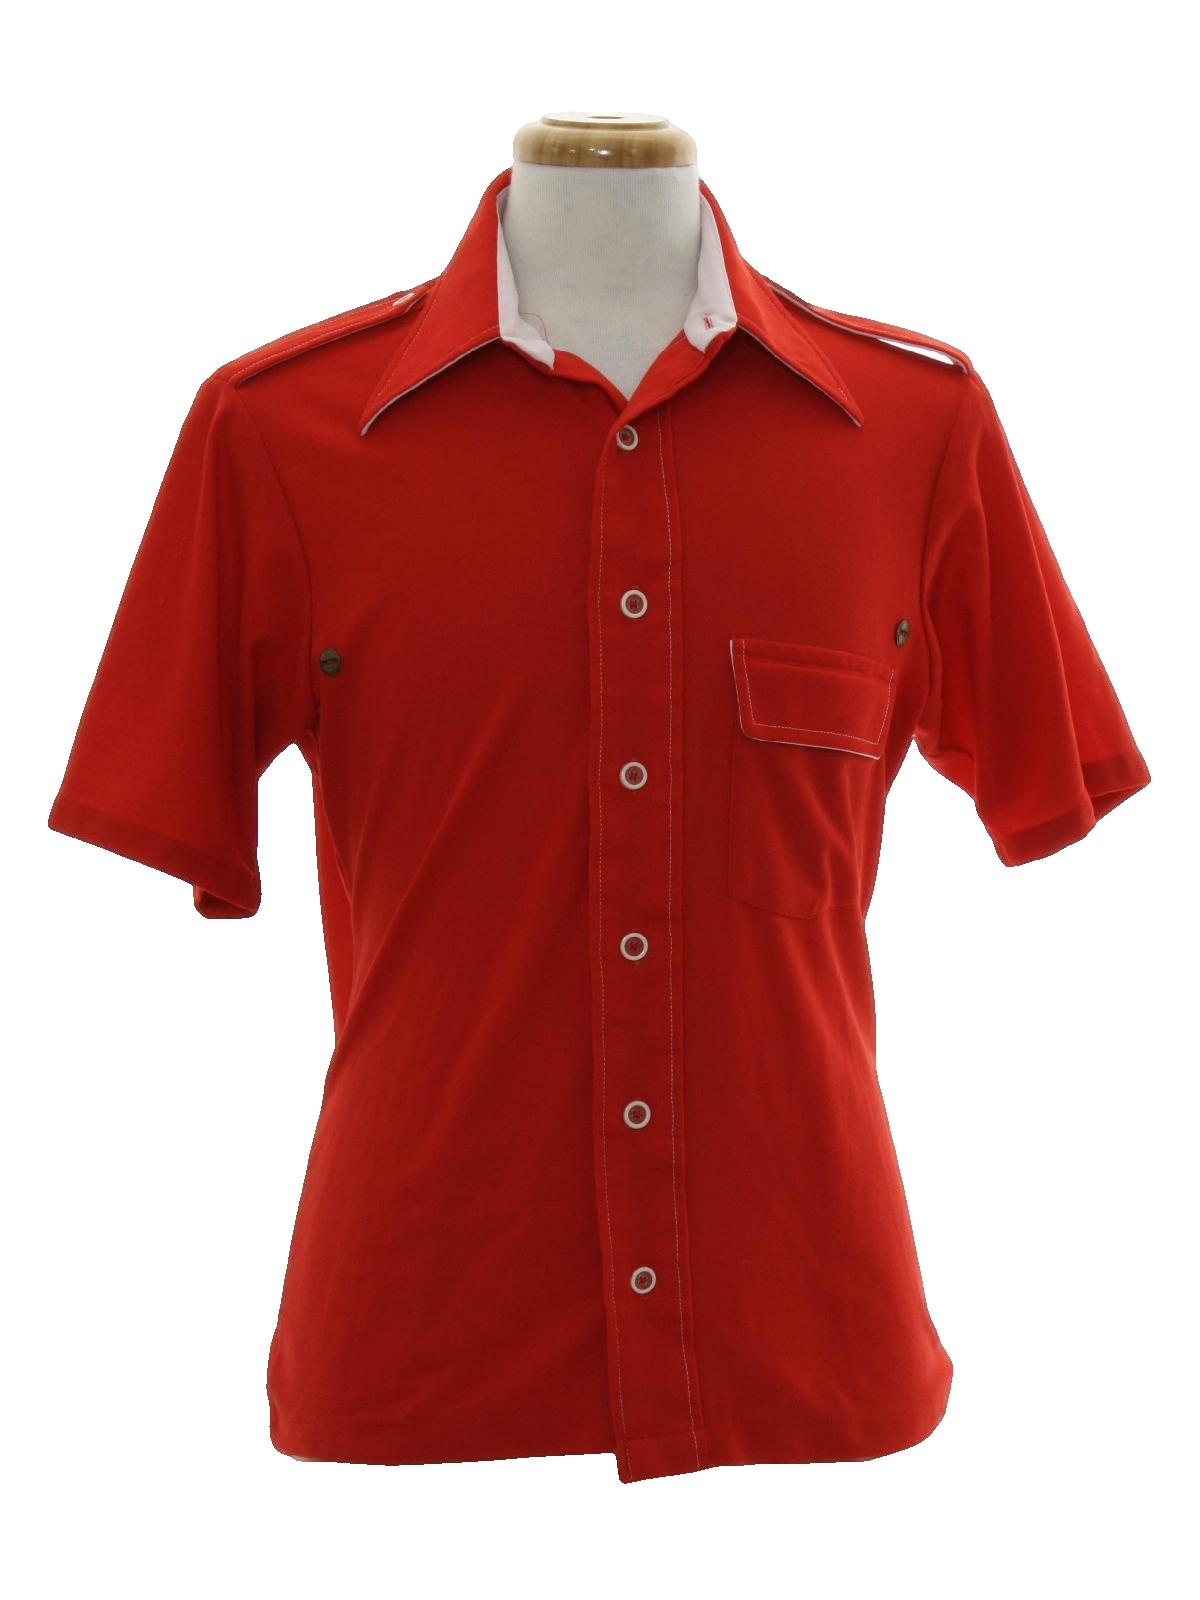 Vintage 1970's Shirt: 70s -Enro- Mens red background slinky polyester ...